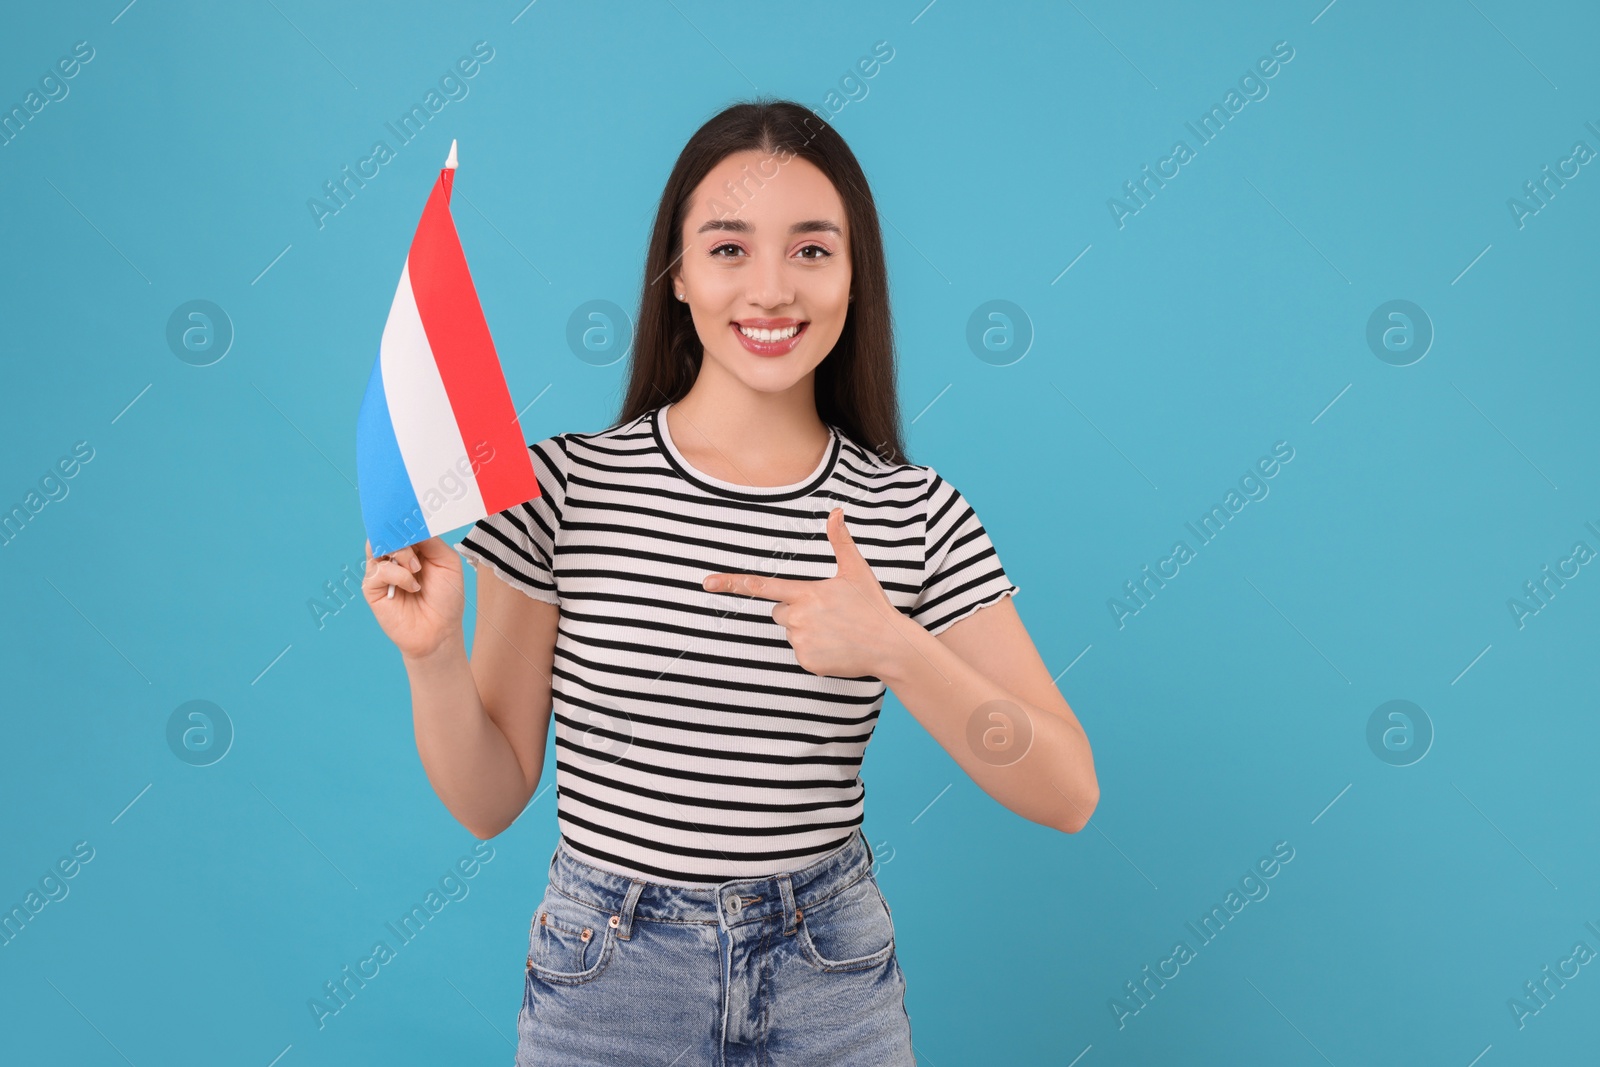 Photo of Young woman holding flag of Netherlands on light blue background